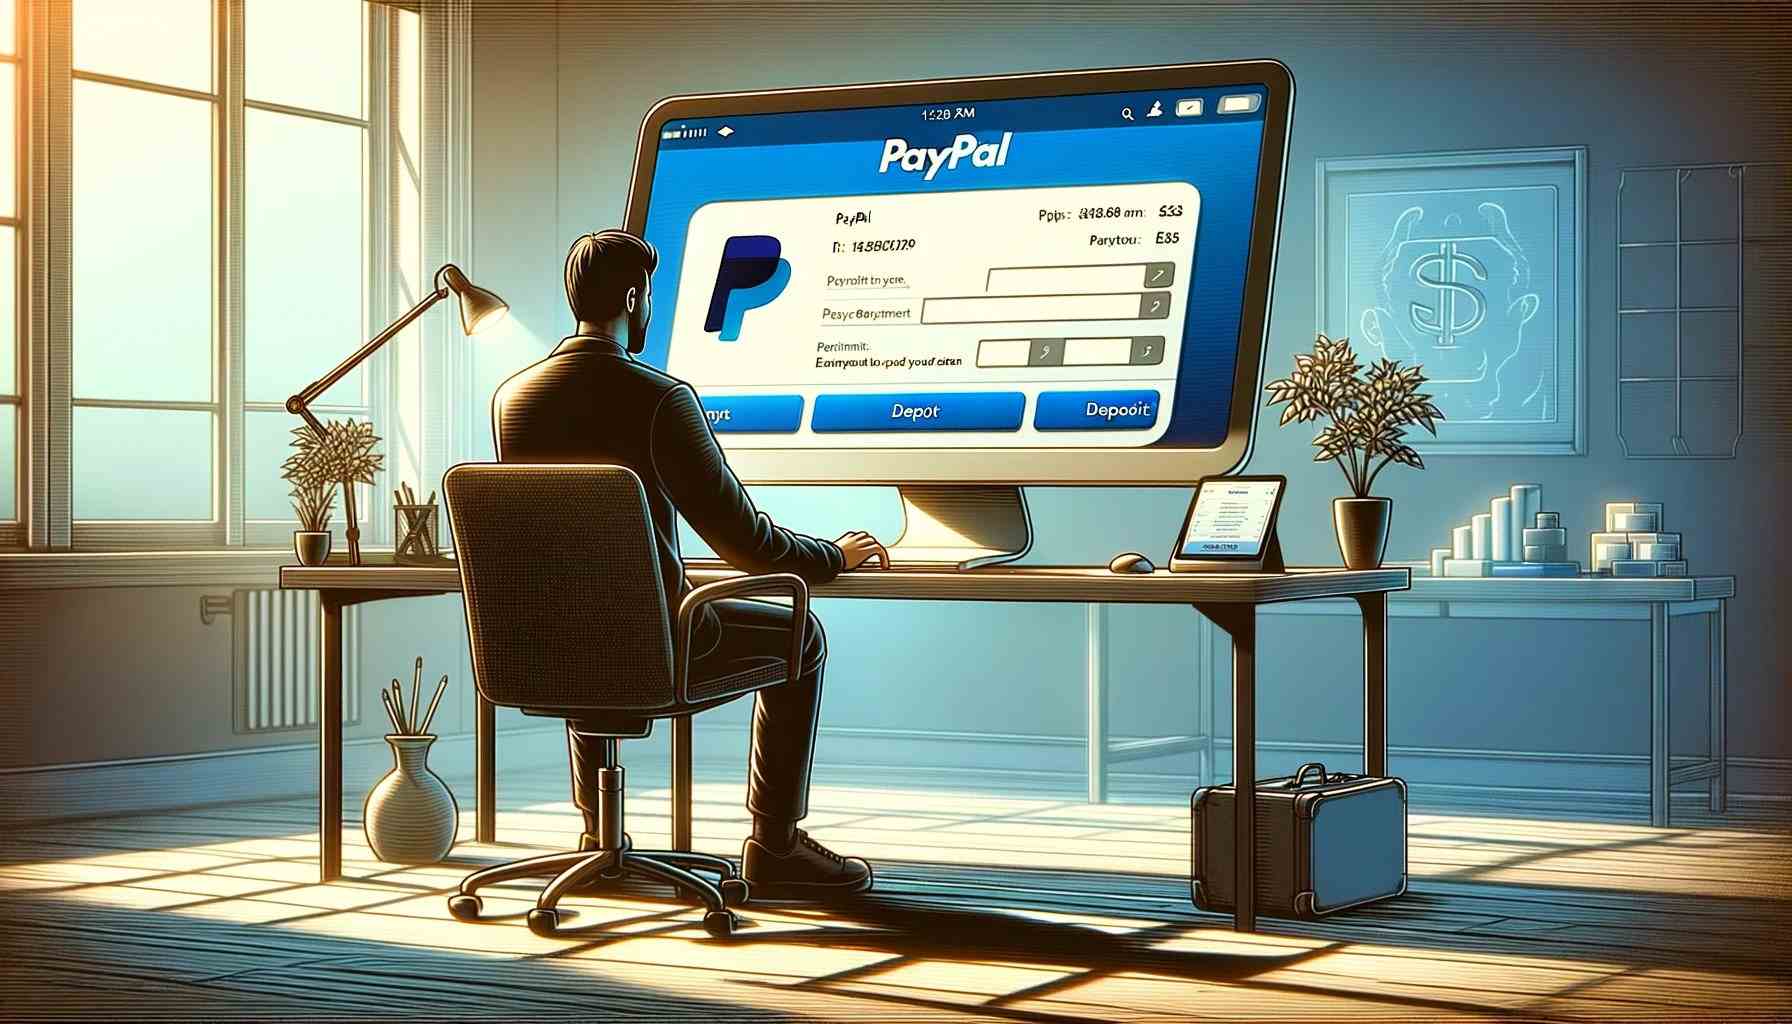 How to make a deposit using PayPal